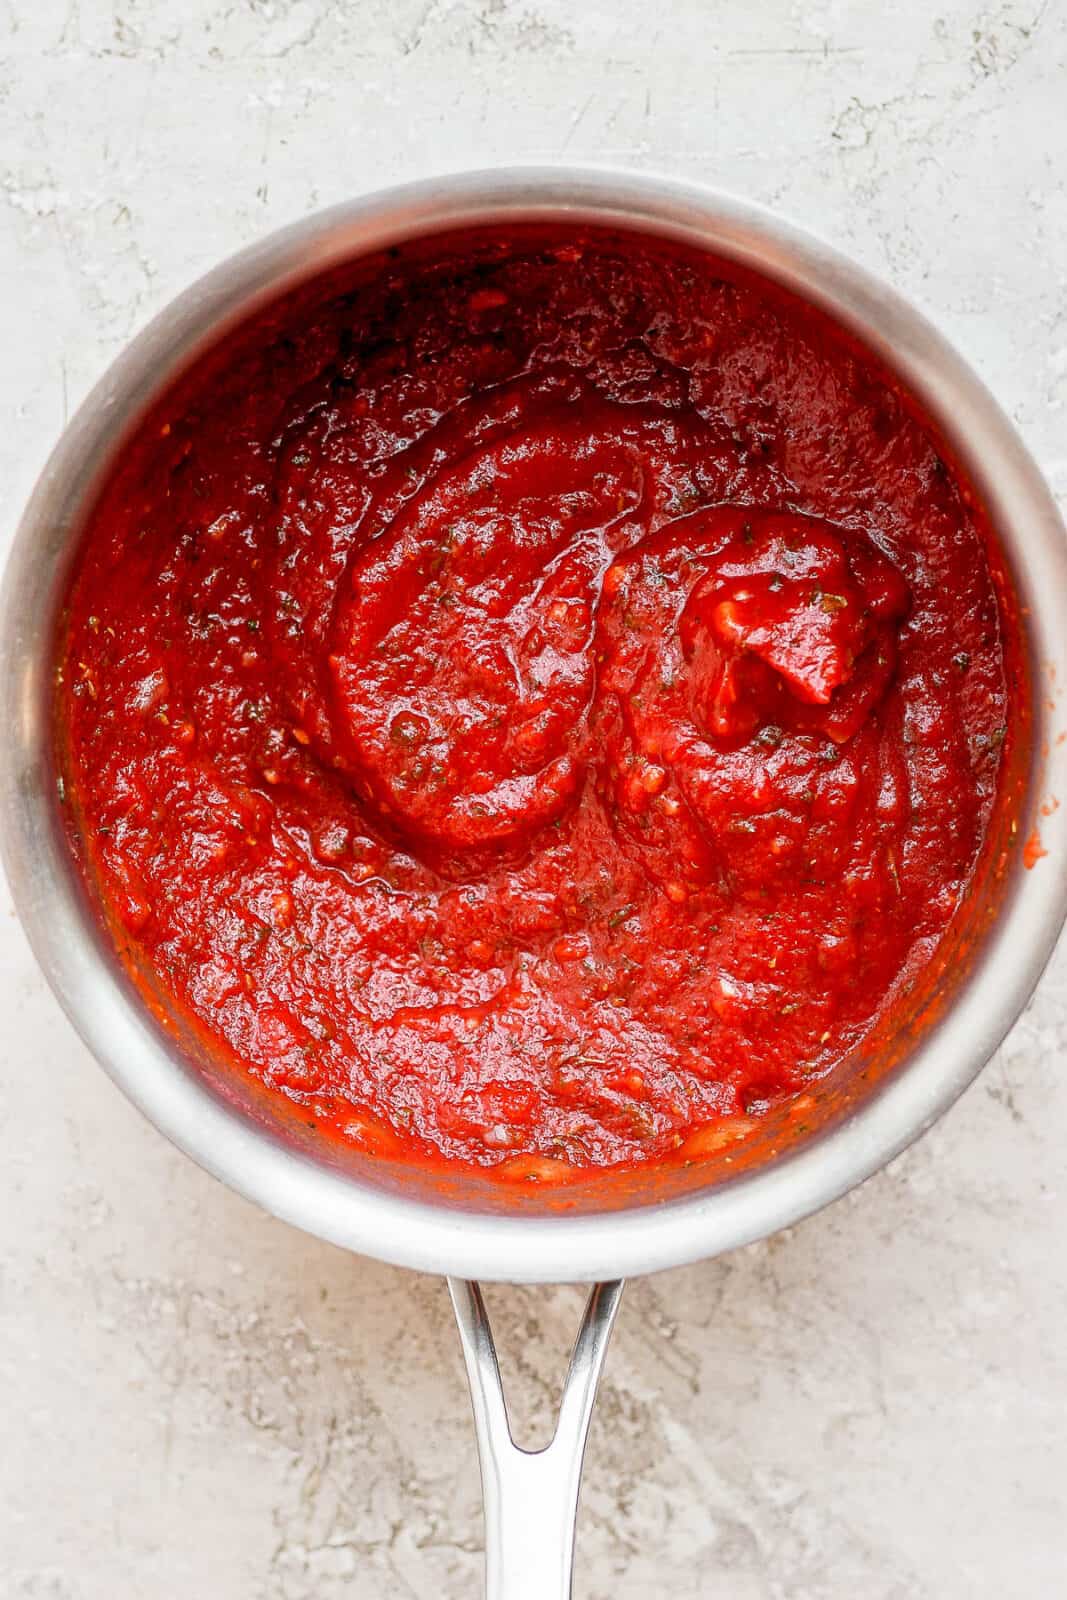 Easy Homemade Pizza Sauce Recipe - The Wooden Skillet